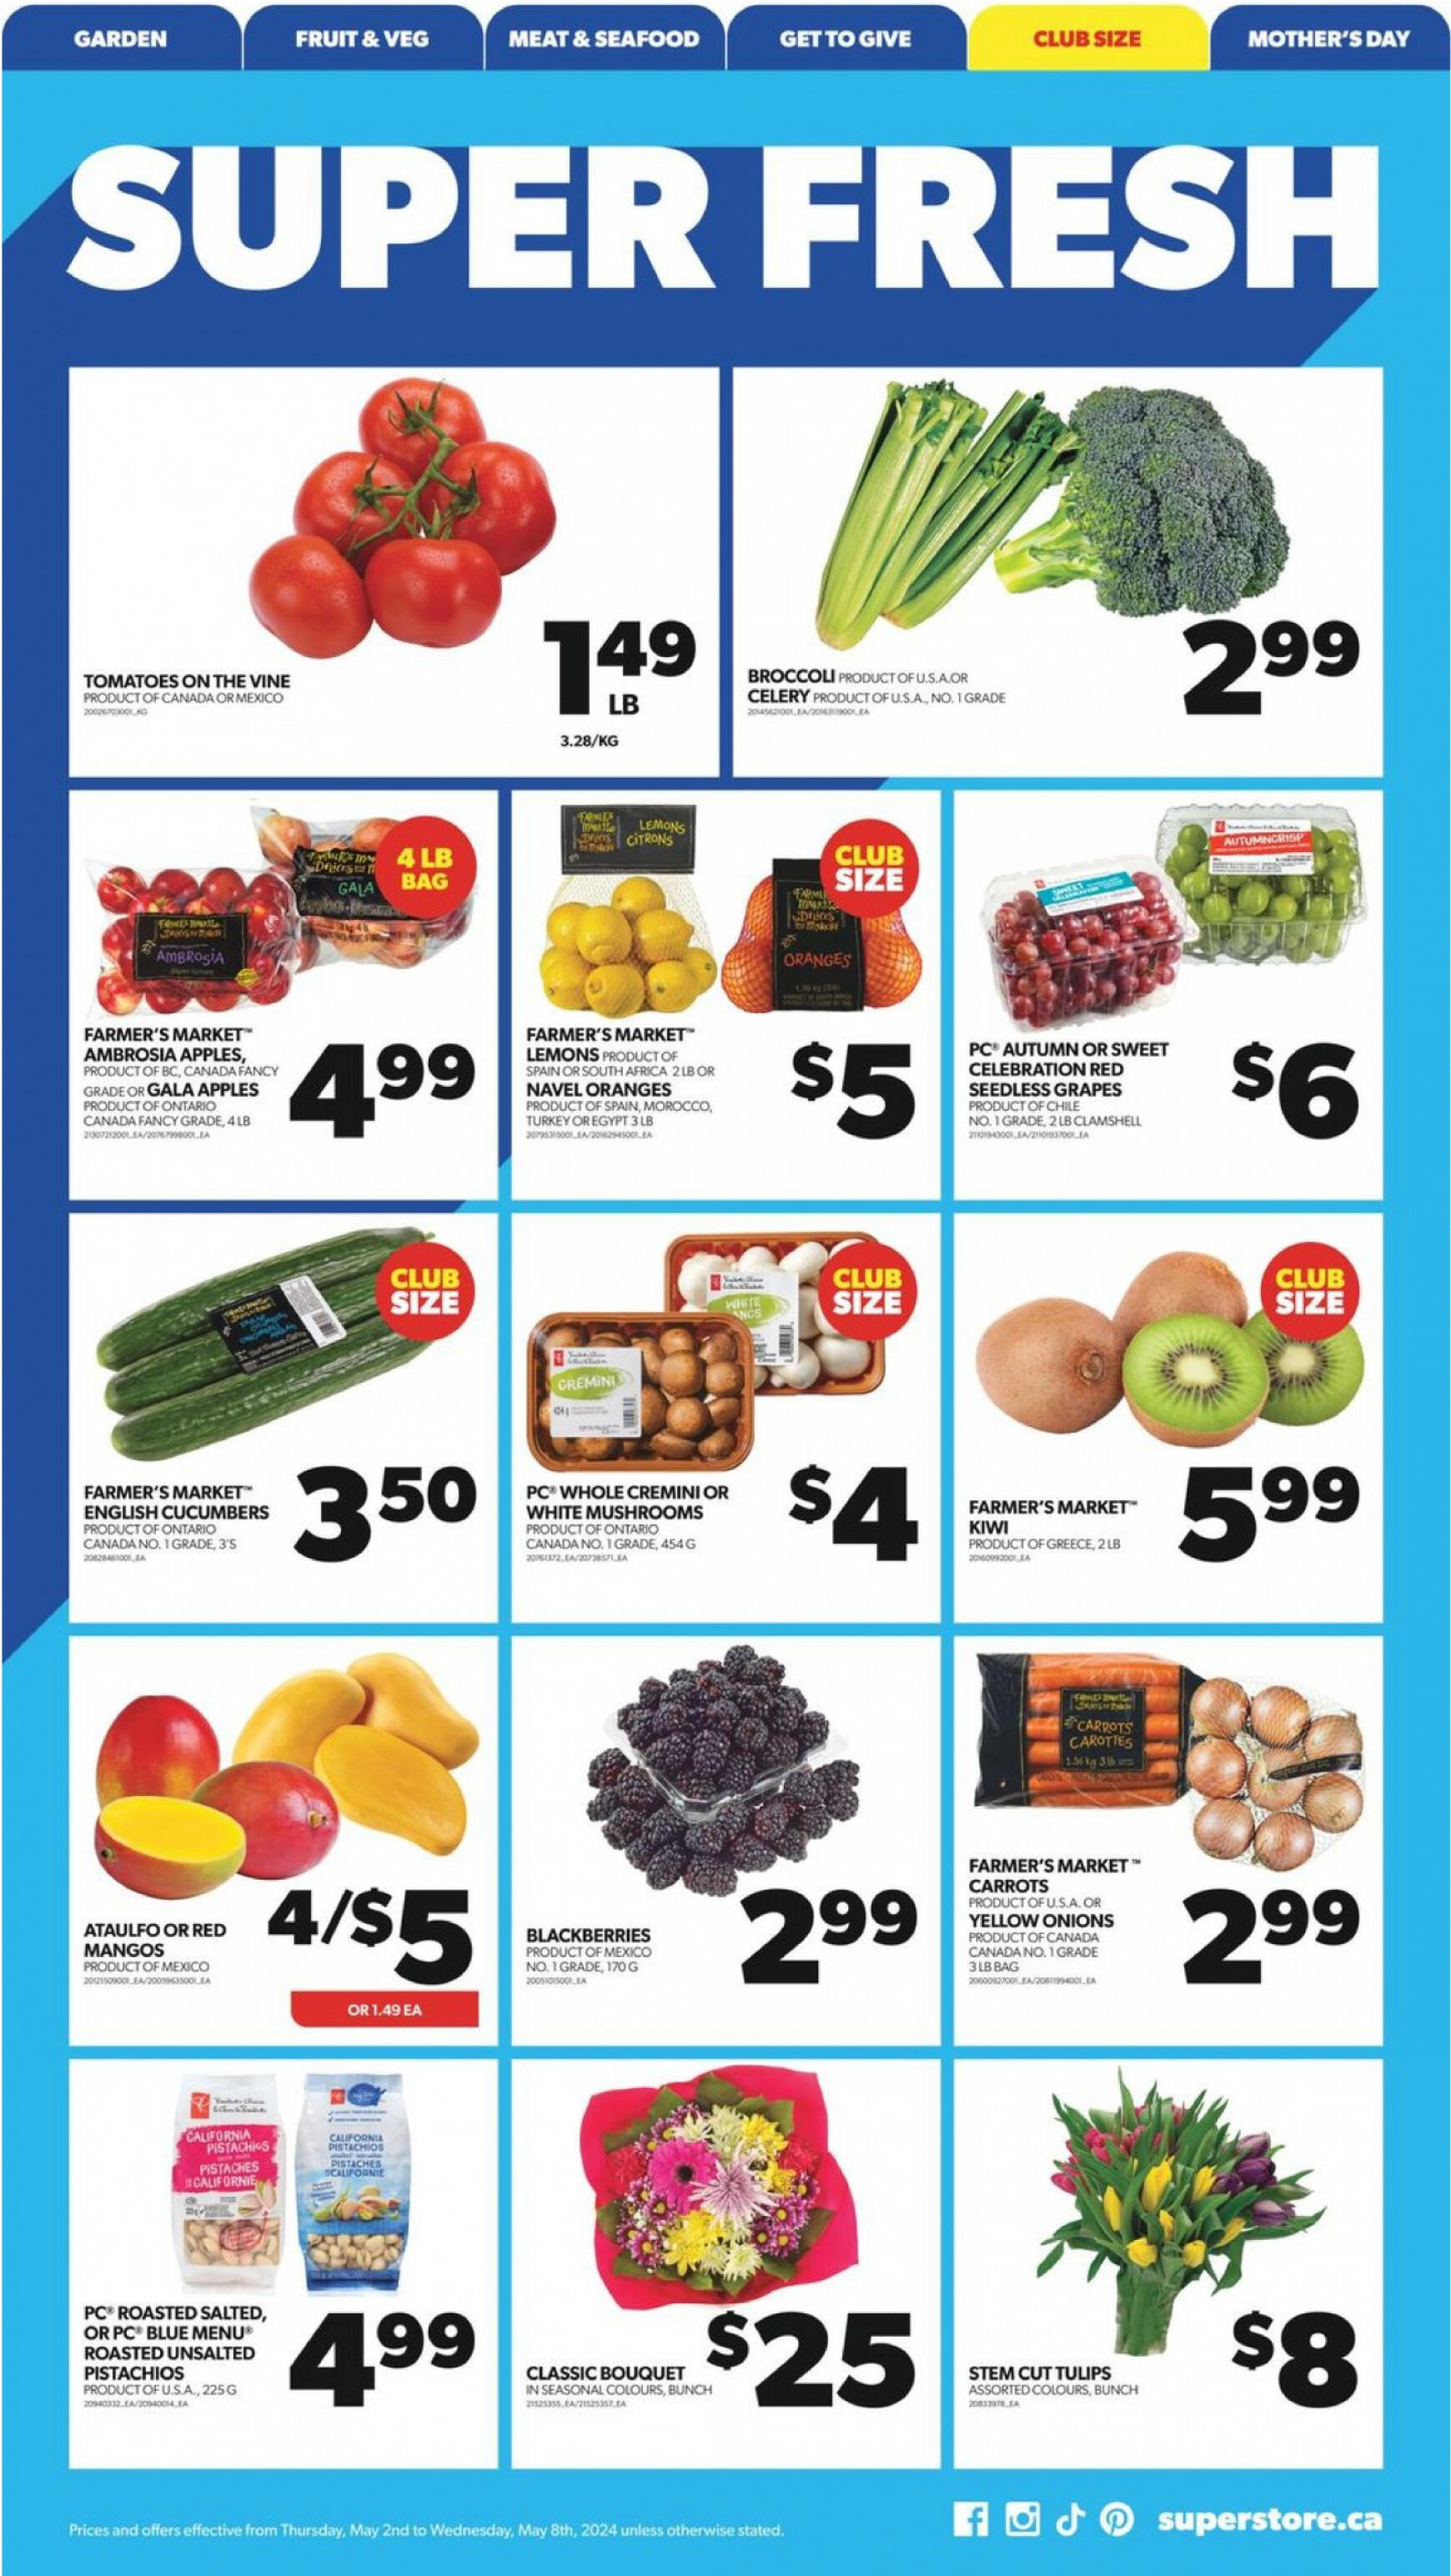 real-canadian-superstore - Real Canadian Superstore flyer current 02.05. - 08.05. - page: 8